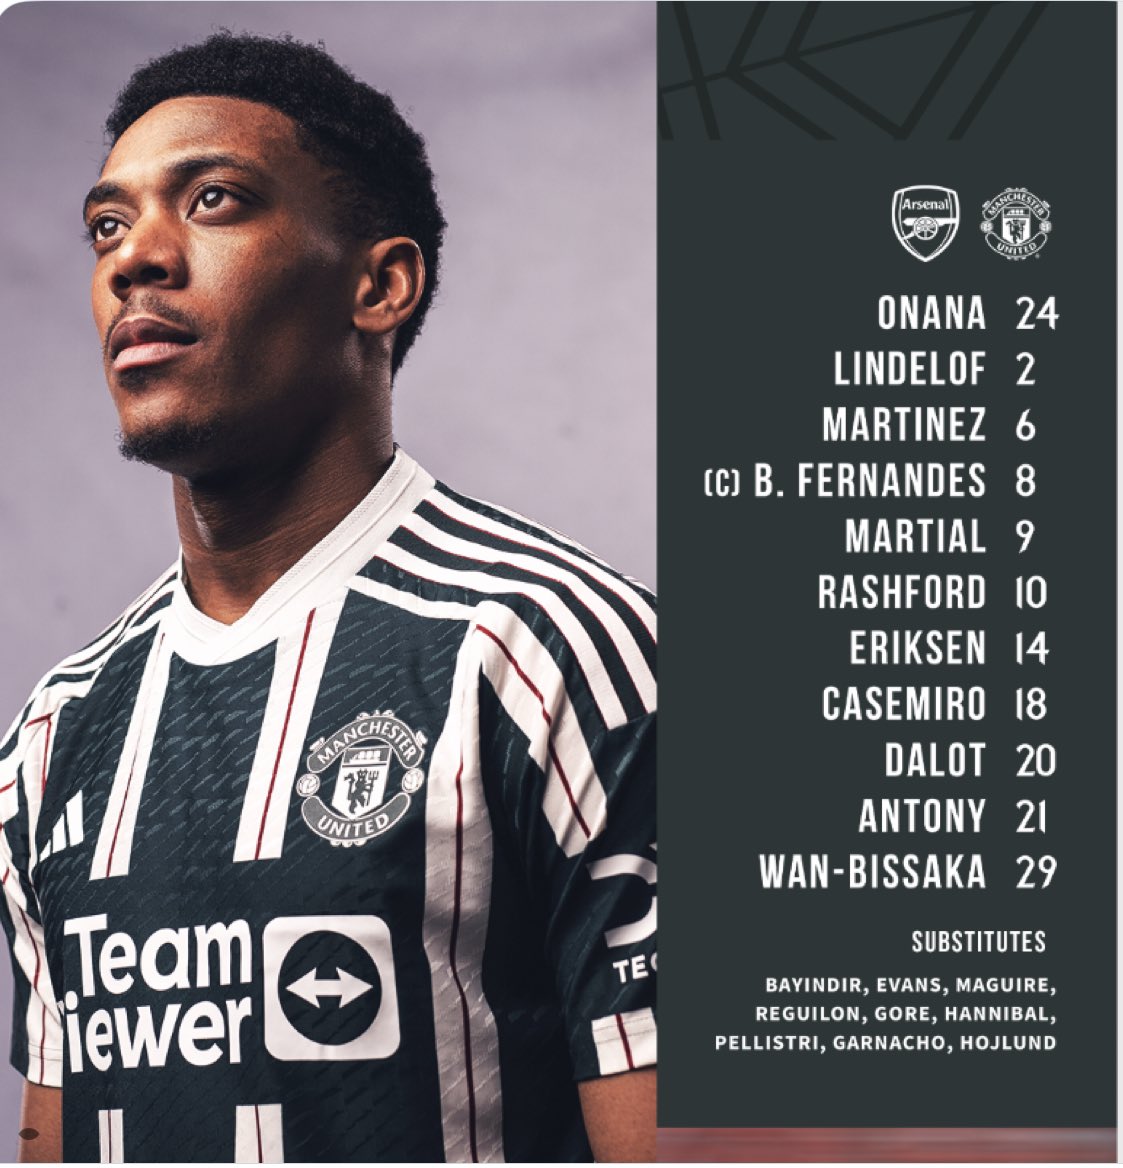 Here is our @ManUtd Line up